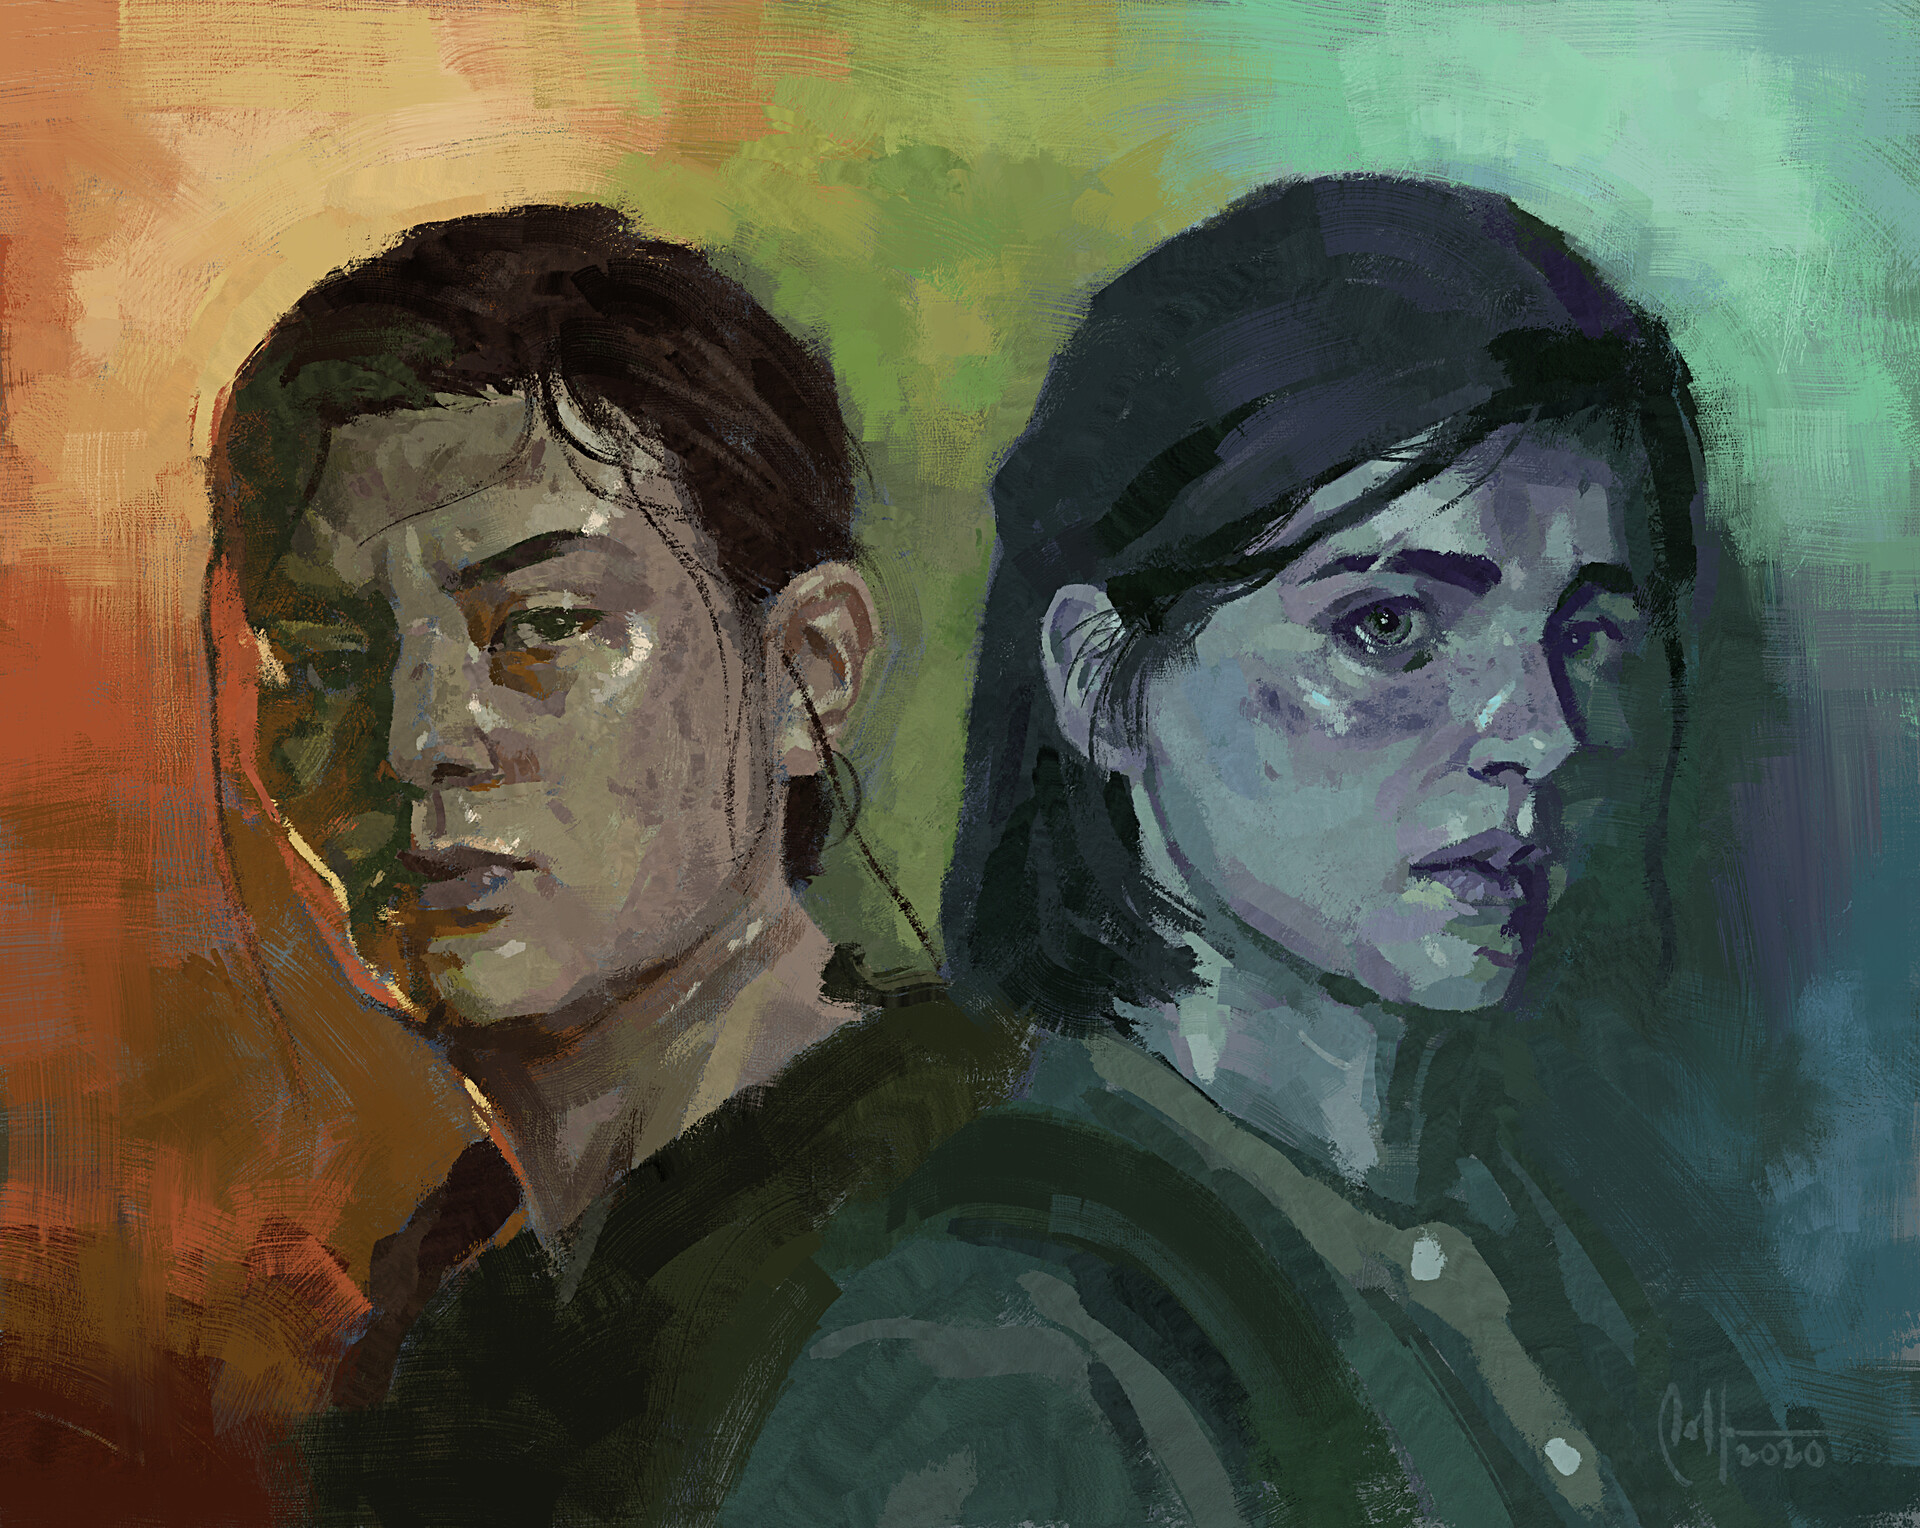 The Last of Us 2 - Ellie and Abby Wallpaper by mikelshehata on DeviantArt